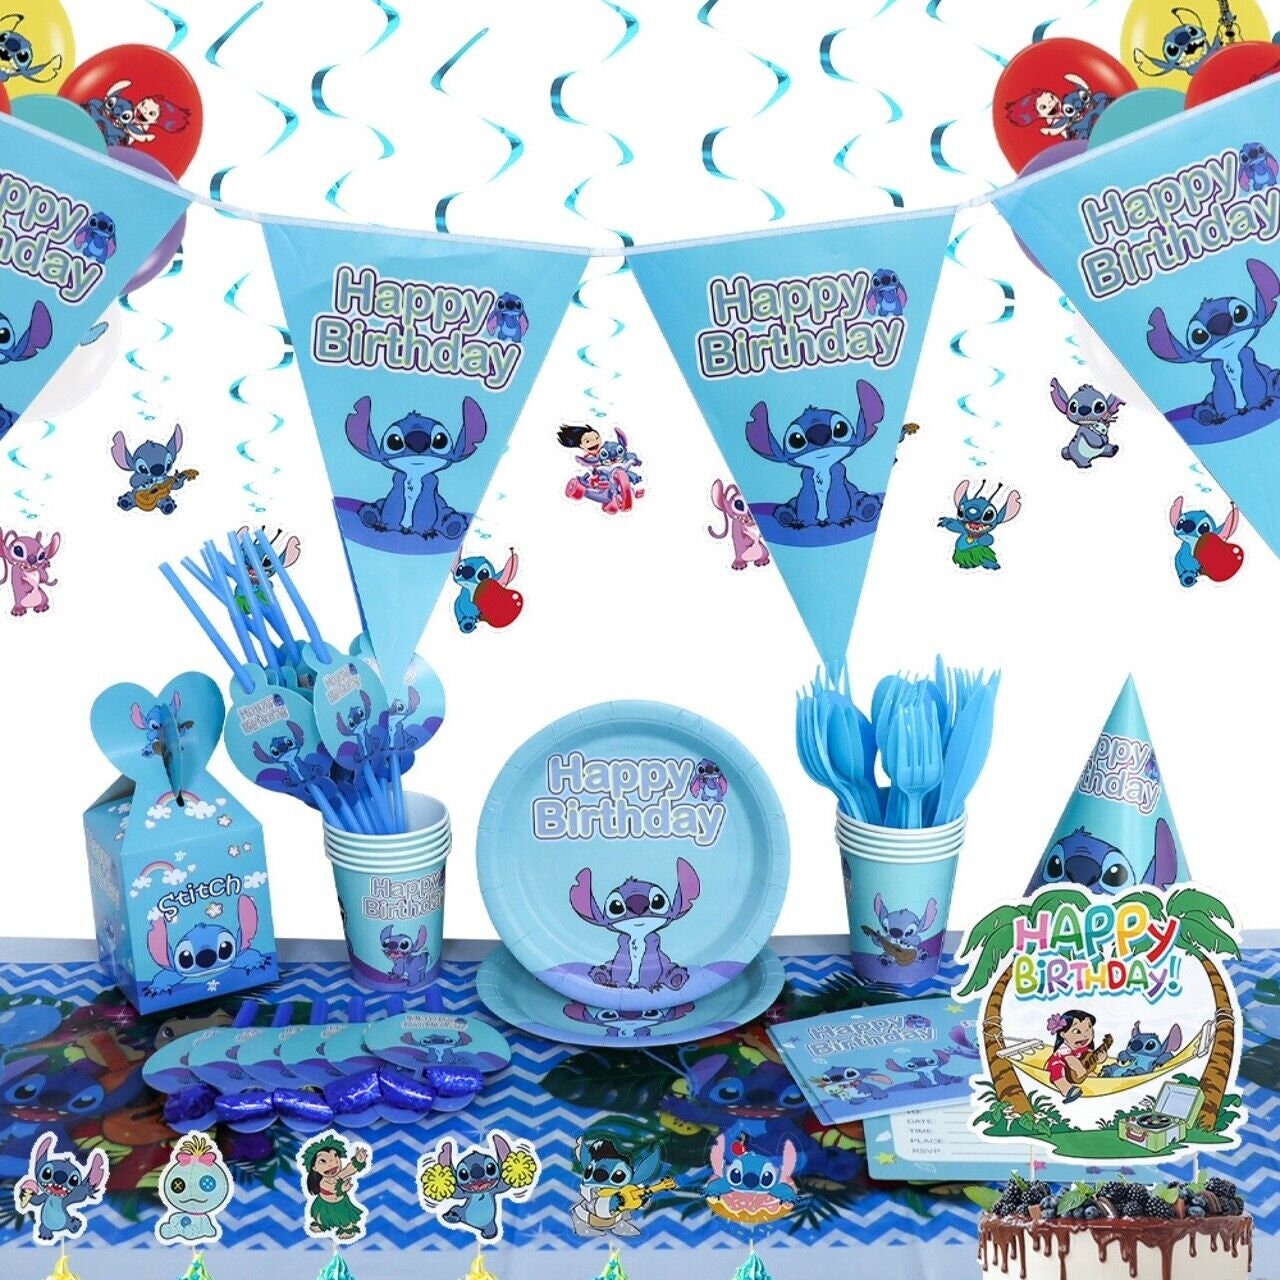 Lilo,stitch,bouquet,balloons,decoration,birthday,girl,cake,celebration,latex,heluim,banner,cups,toppers,angel,pink,blue,hawaiian,surfing  